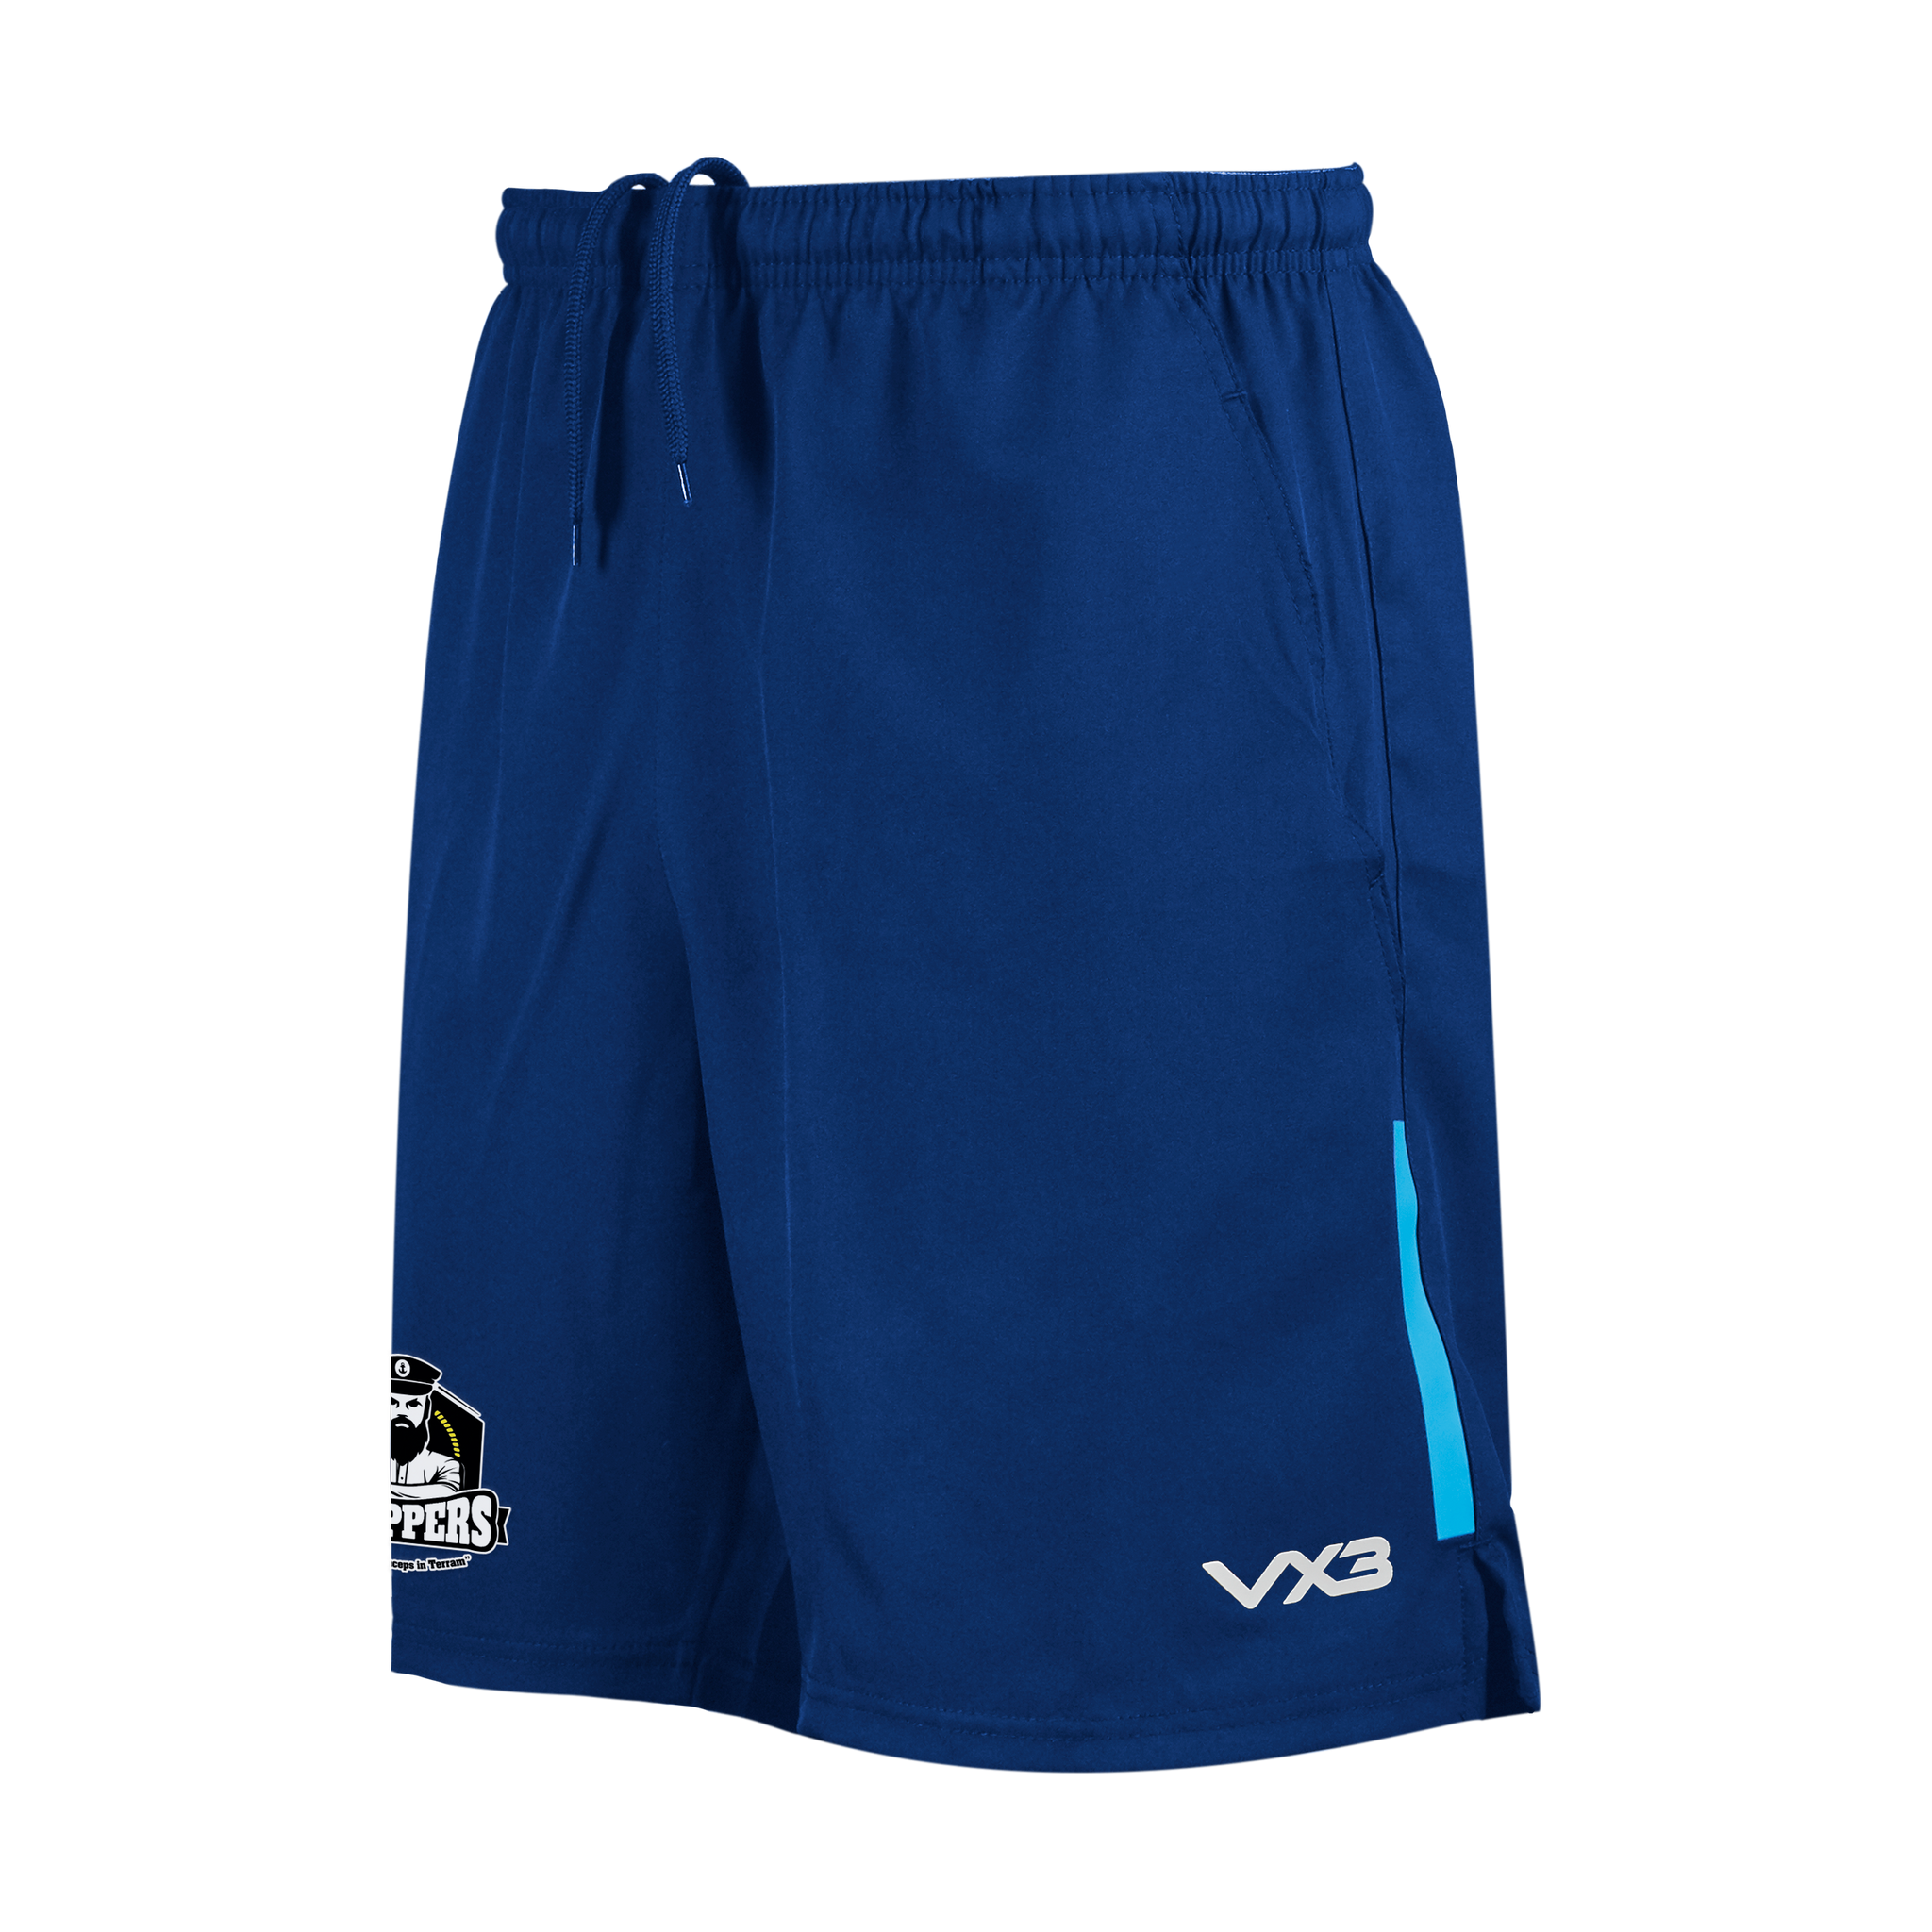 Skippers Fortis Youth Travel Shorts